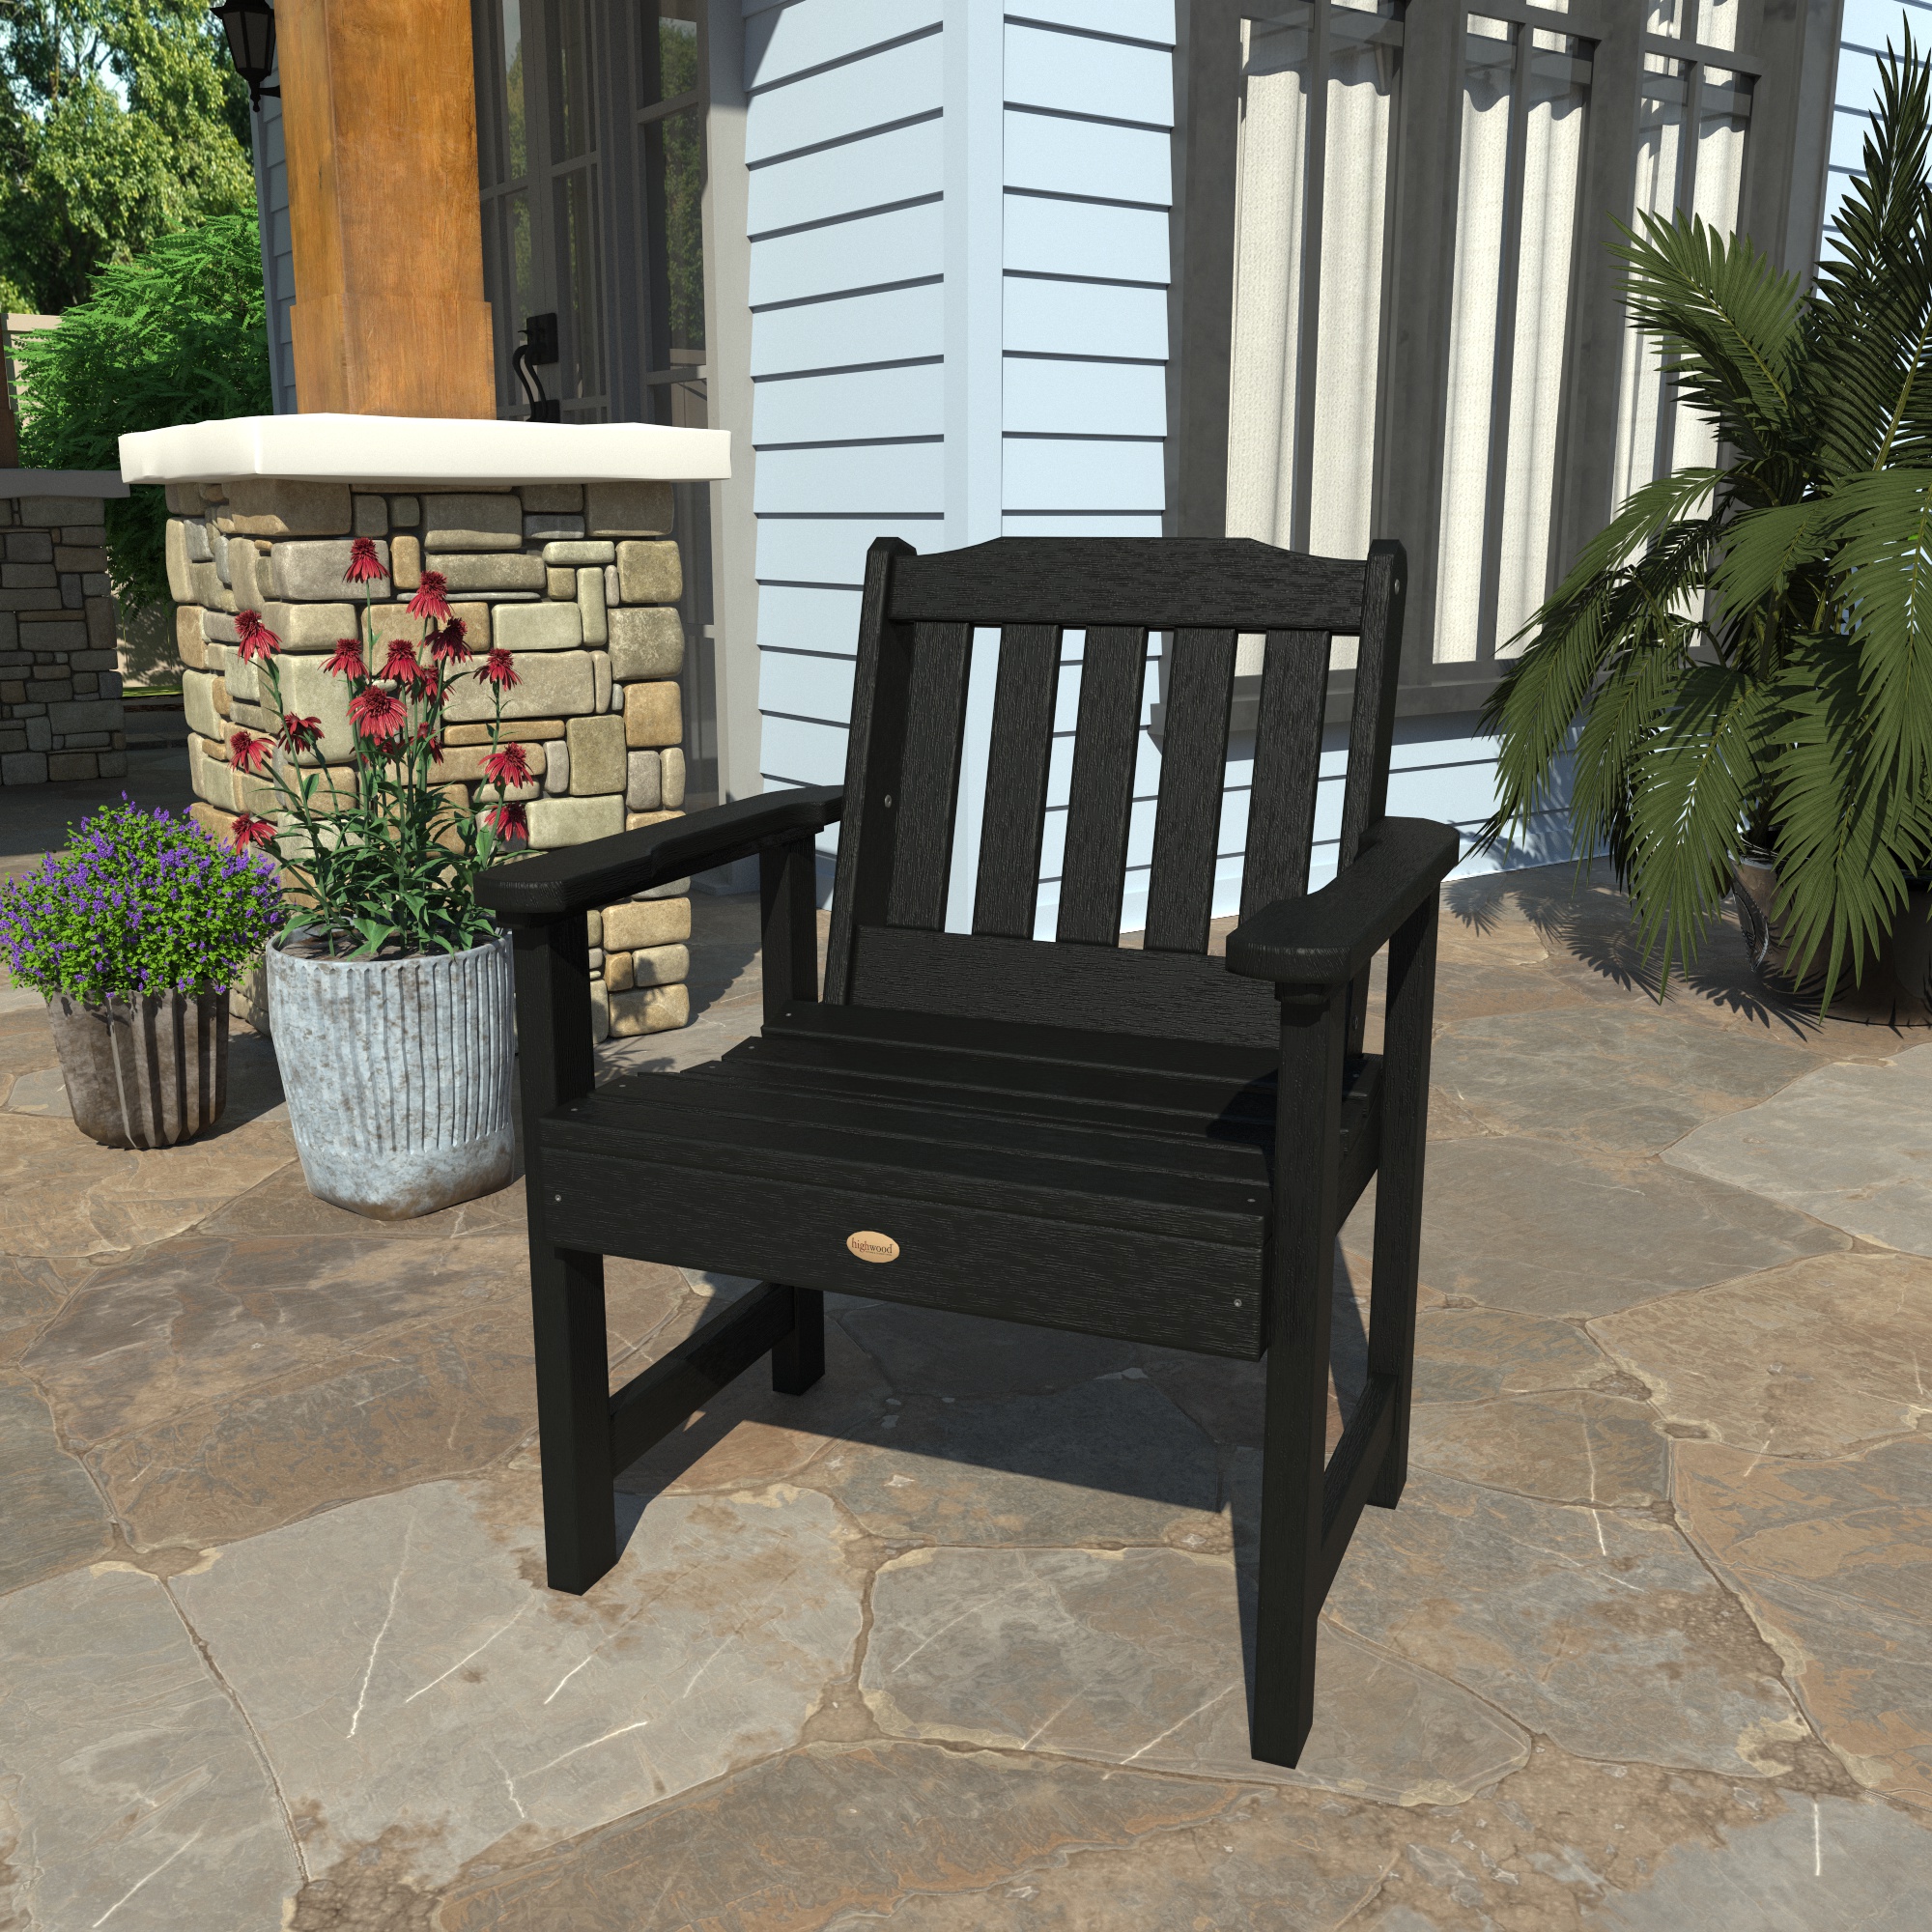 Highwood 3pc Lehigh Garden Chair Set with 1 Adirondack Square Side Table - image 5 of 7